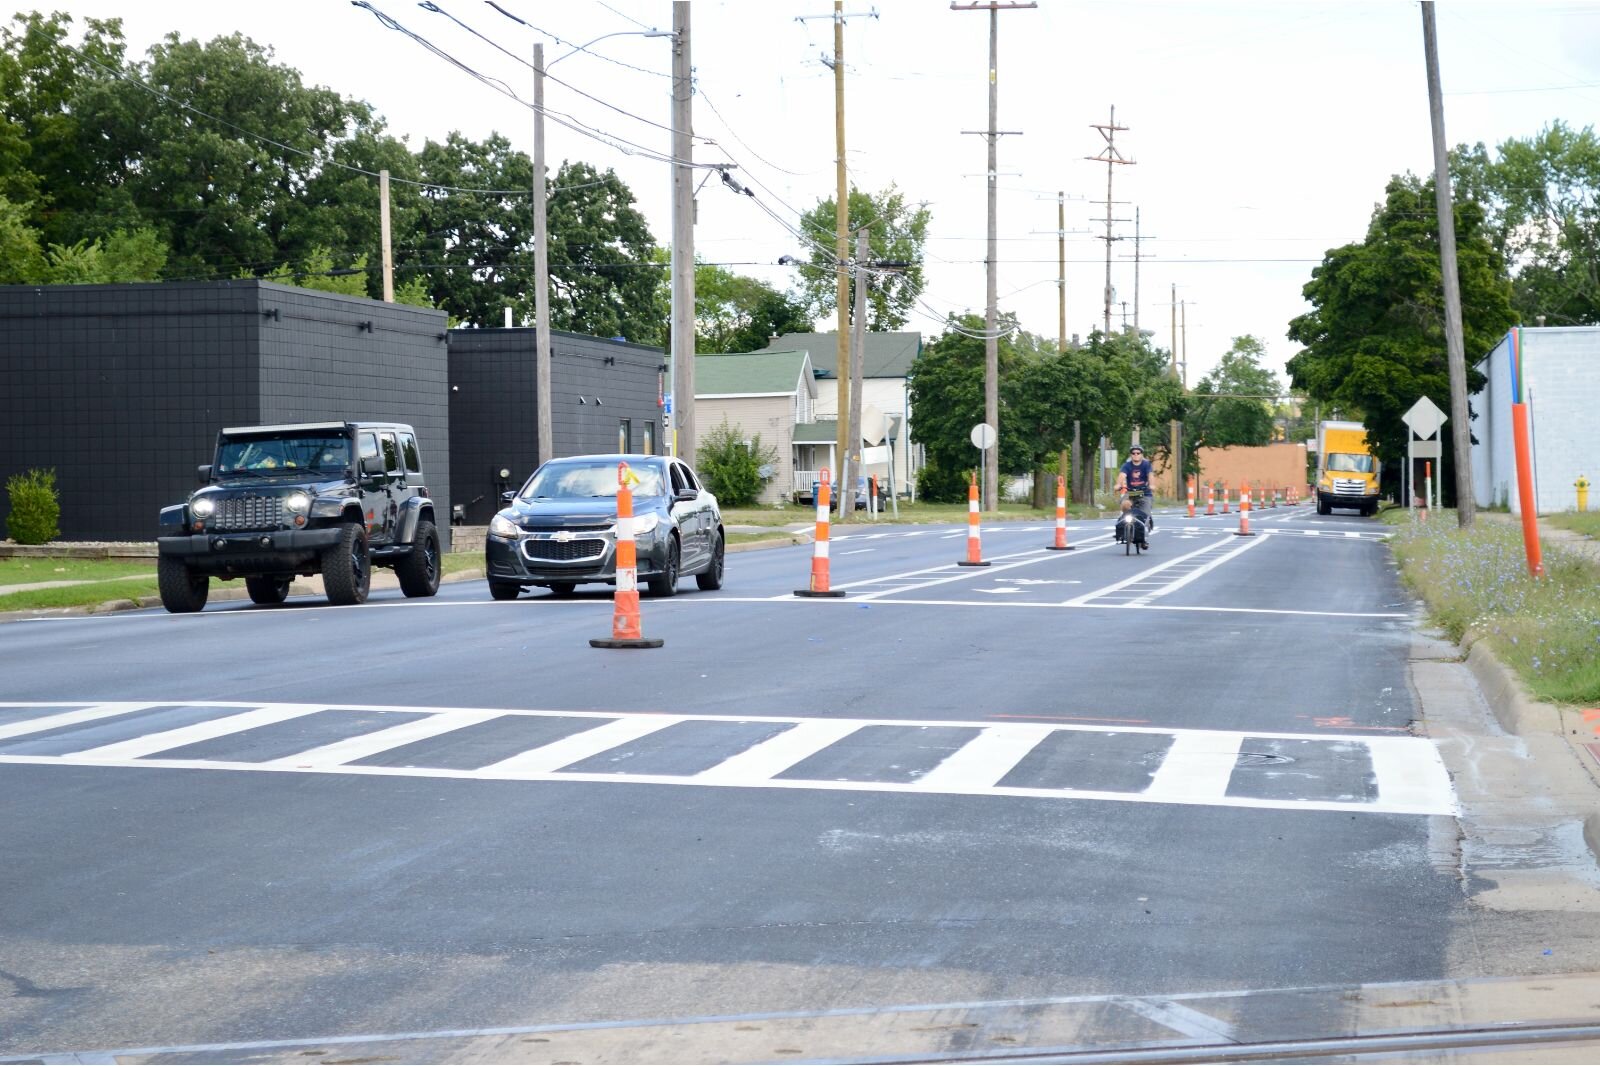  North Westnedge traffic calming: Two right-sized traffic lanes, a bike lane and curbside parking, meant to help slow traffic to the speed limit and give alternate forms of transportation a space. Cones are where permanent posts will be placed.